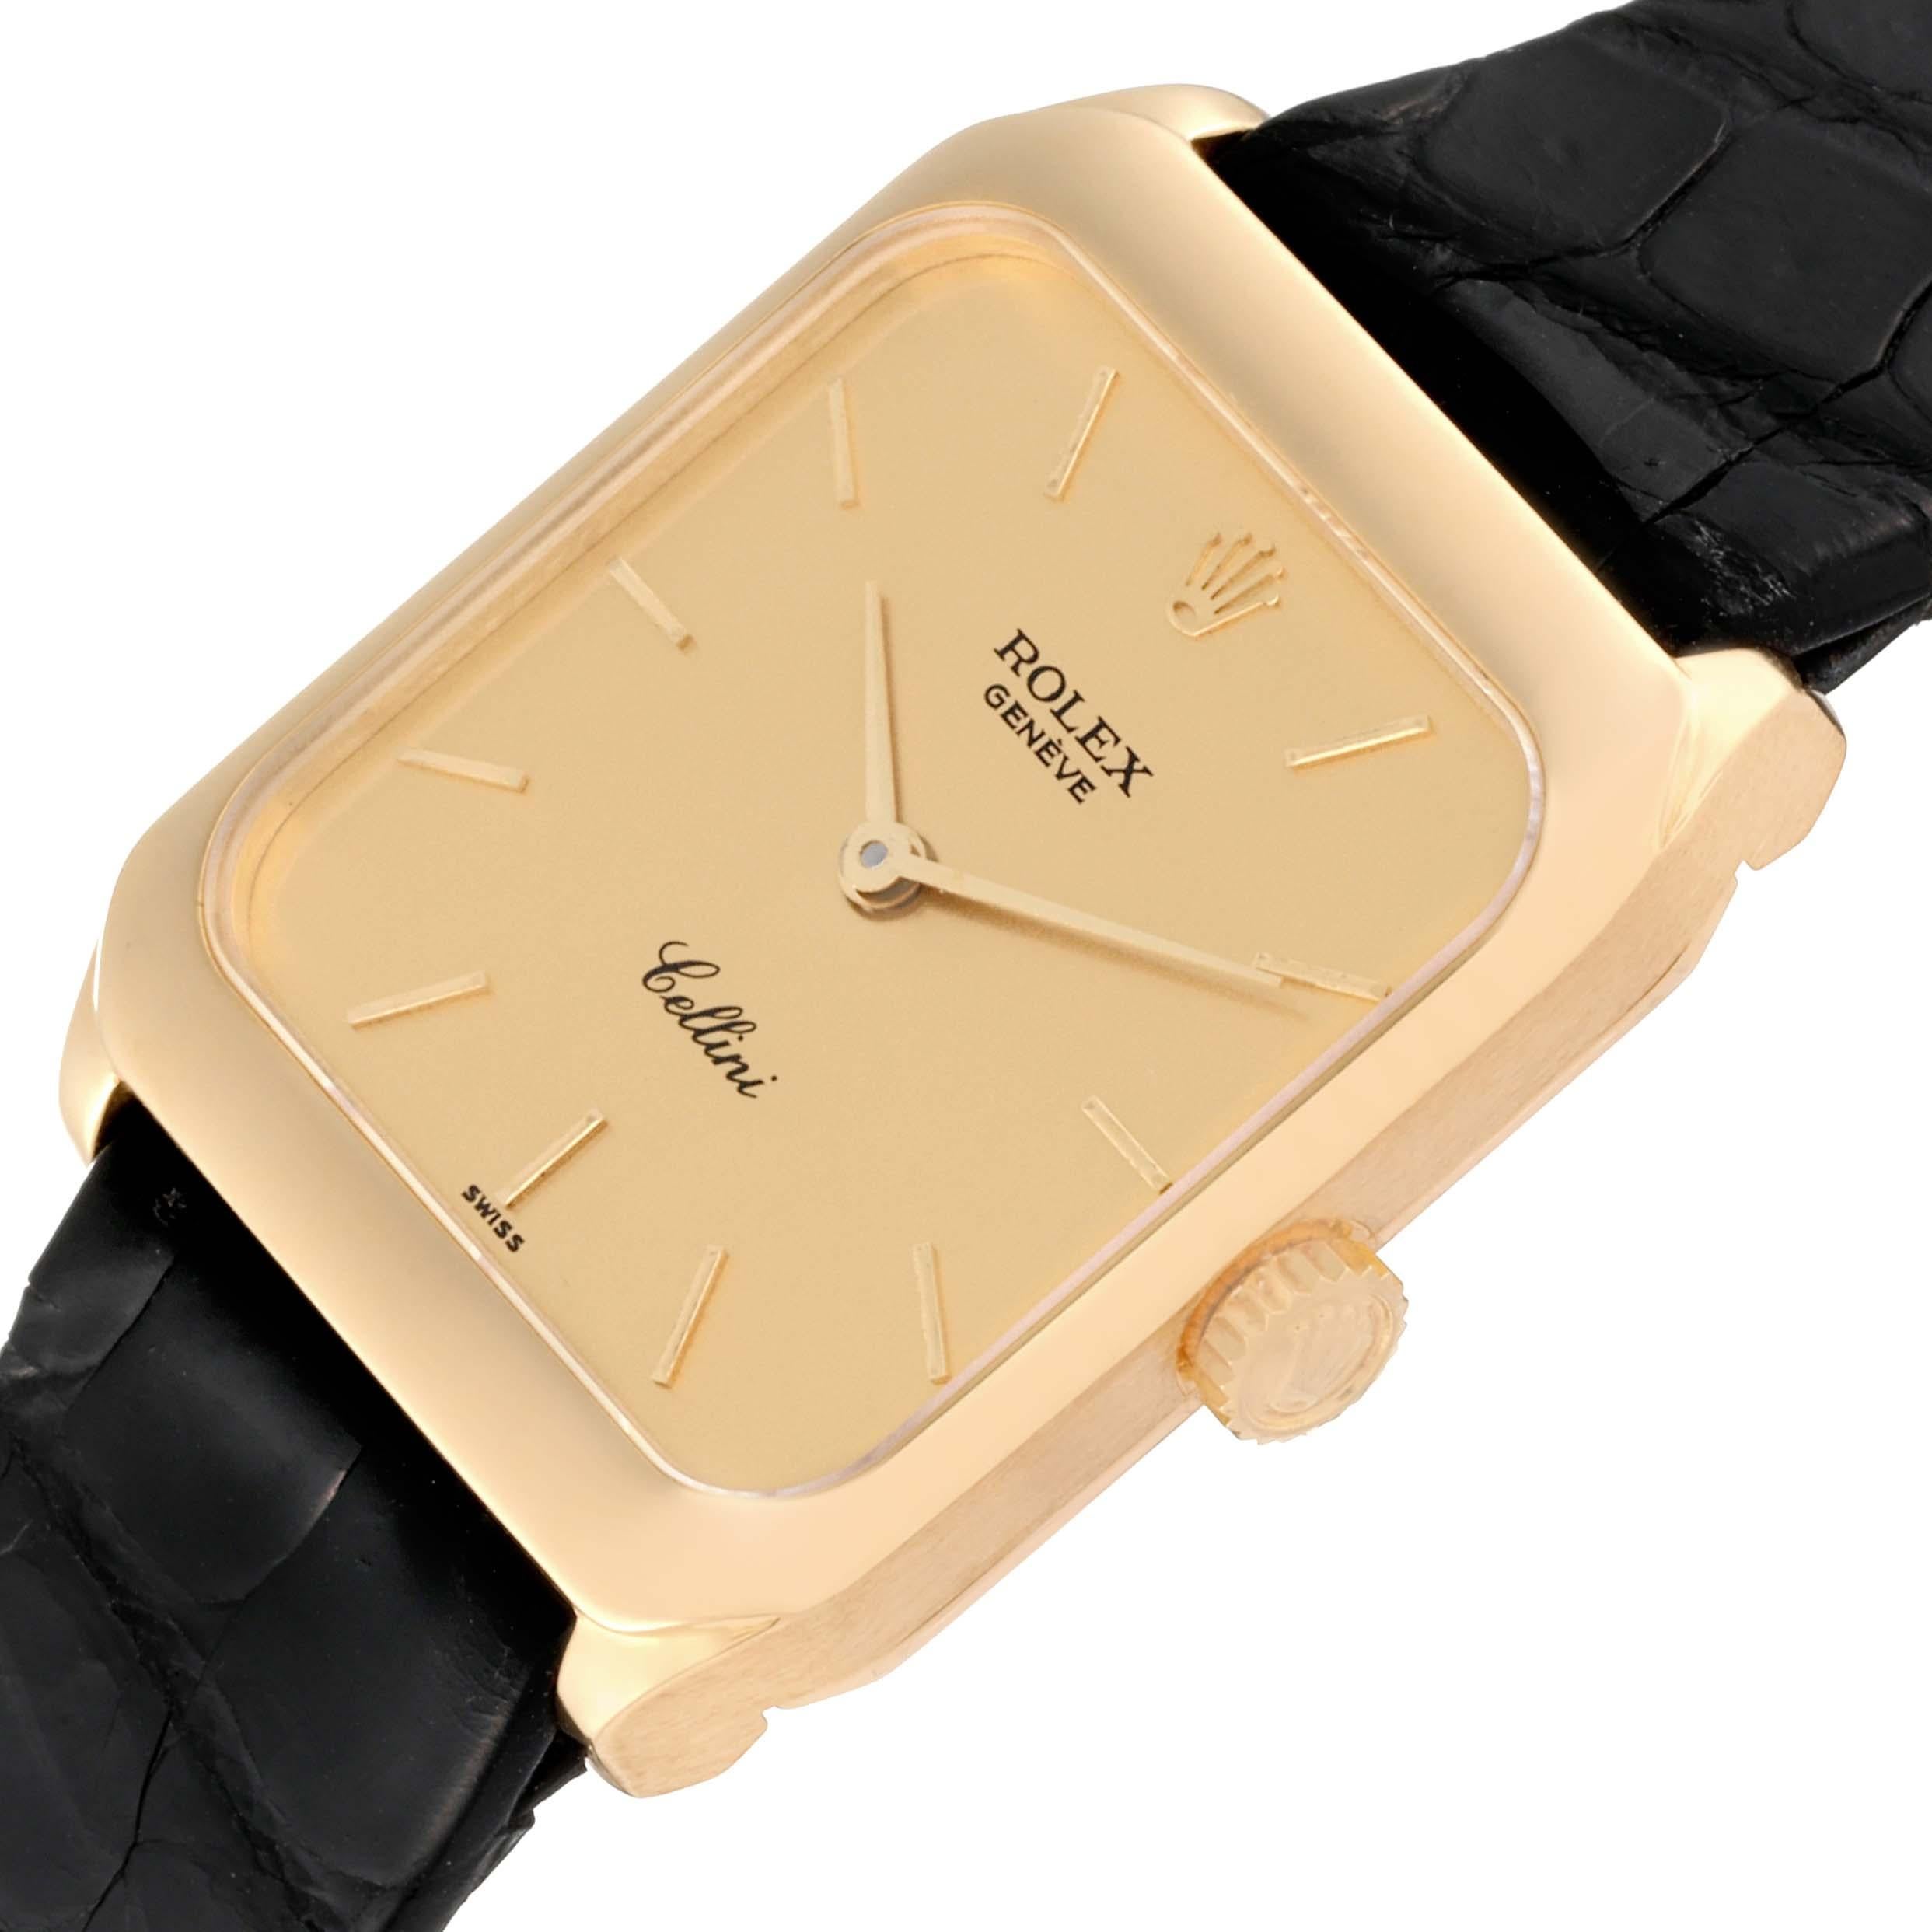 Rolex Cellini Yellow Gold Champagne Dial Mens Vintage Watch 4131 Papers 1